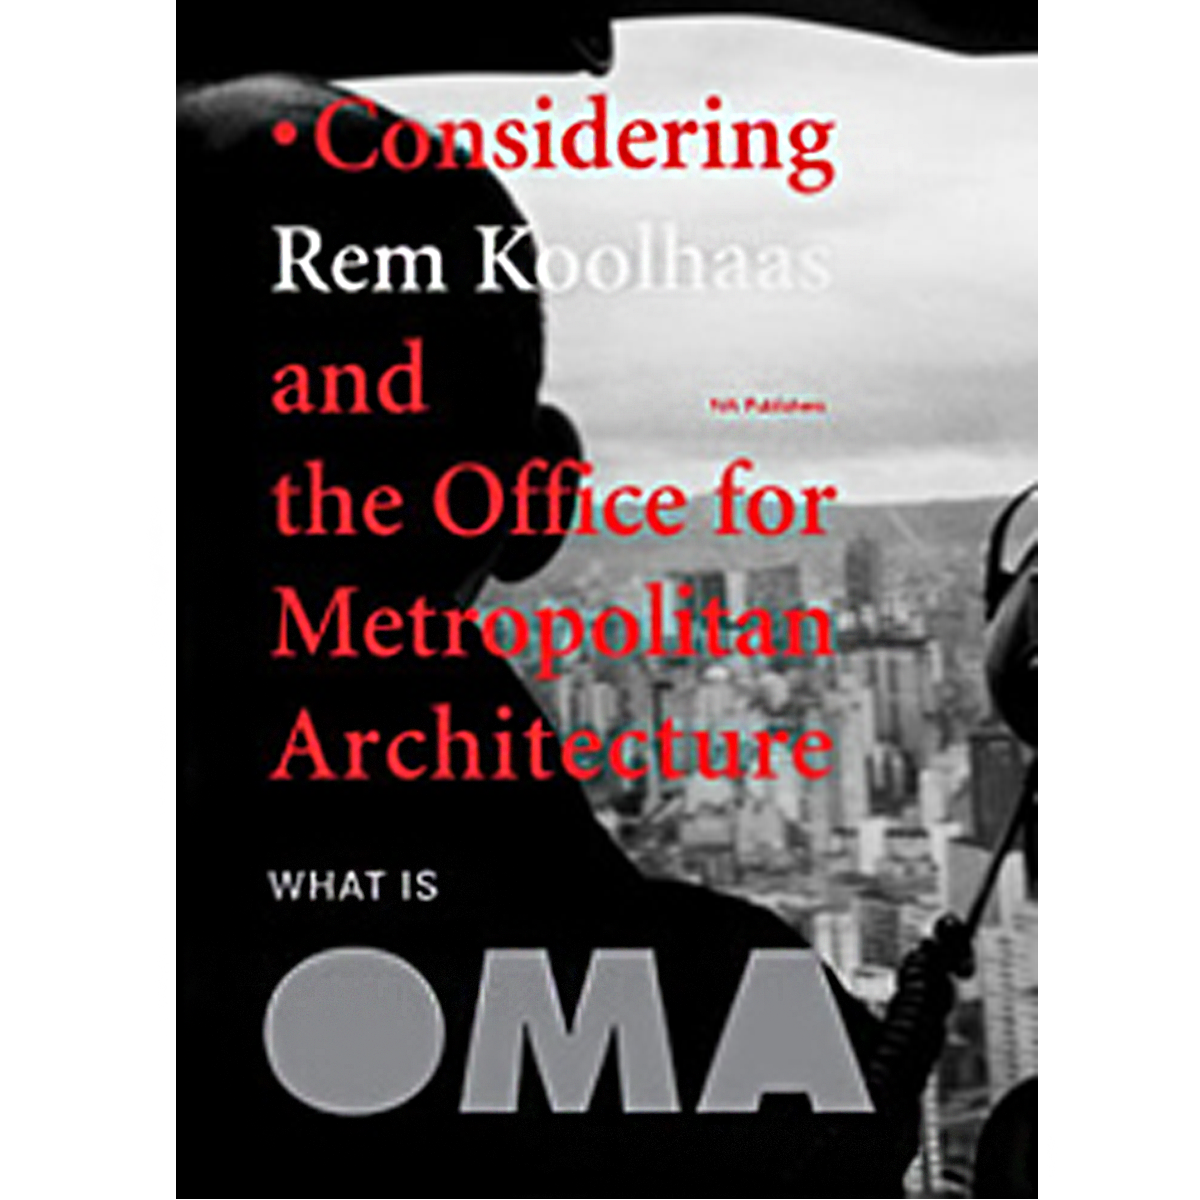 What is AMO? Considering Rem Koolhaas and the OMA